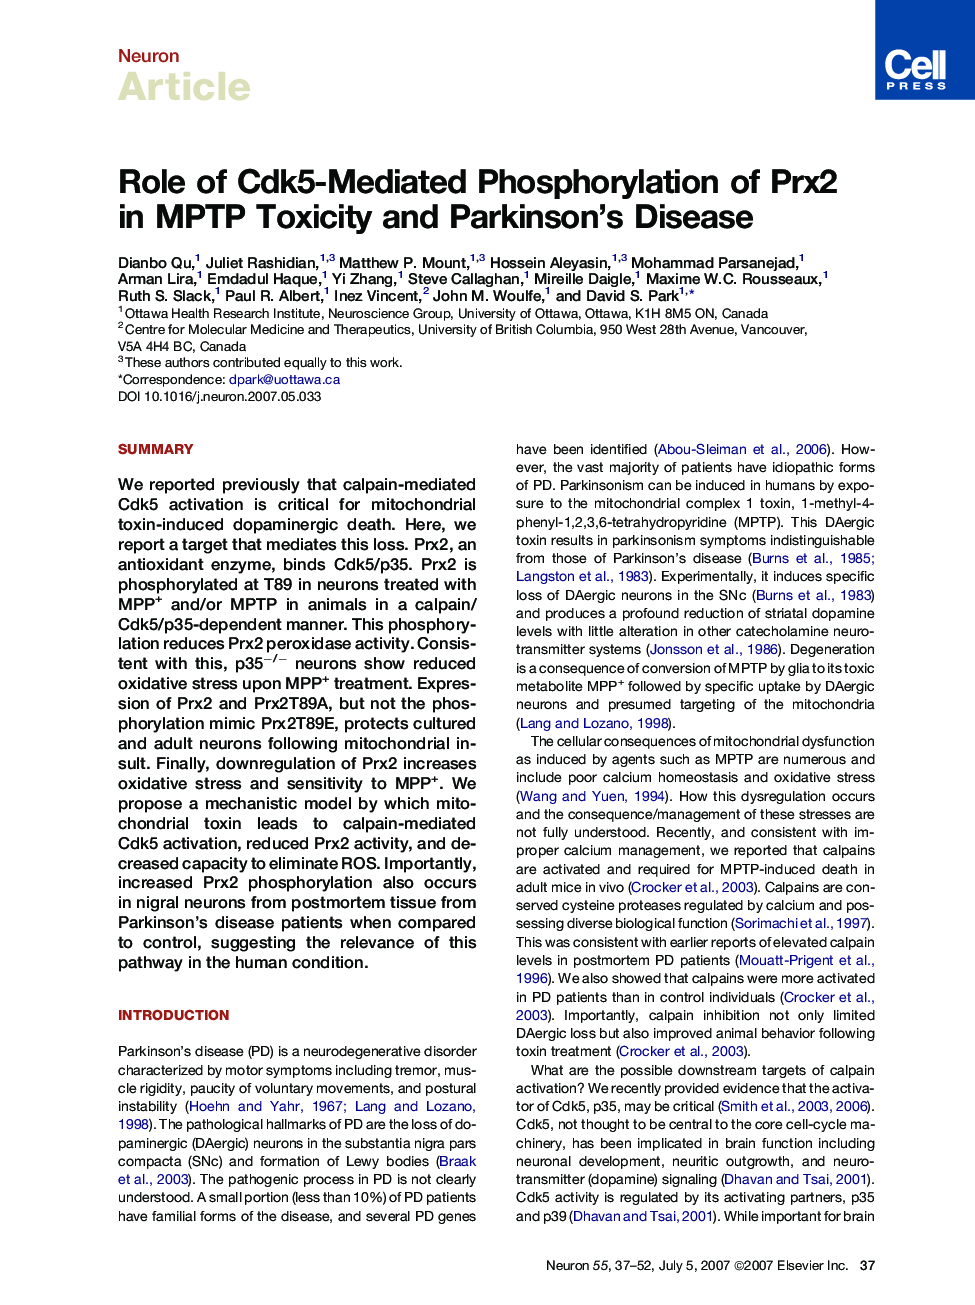 Role of Cdk5-Mediated Phosphorylation of Prx2 in MPTP Toxicity and Parkinson's Disease